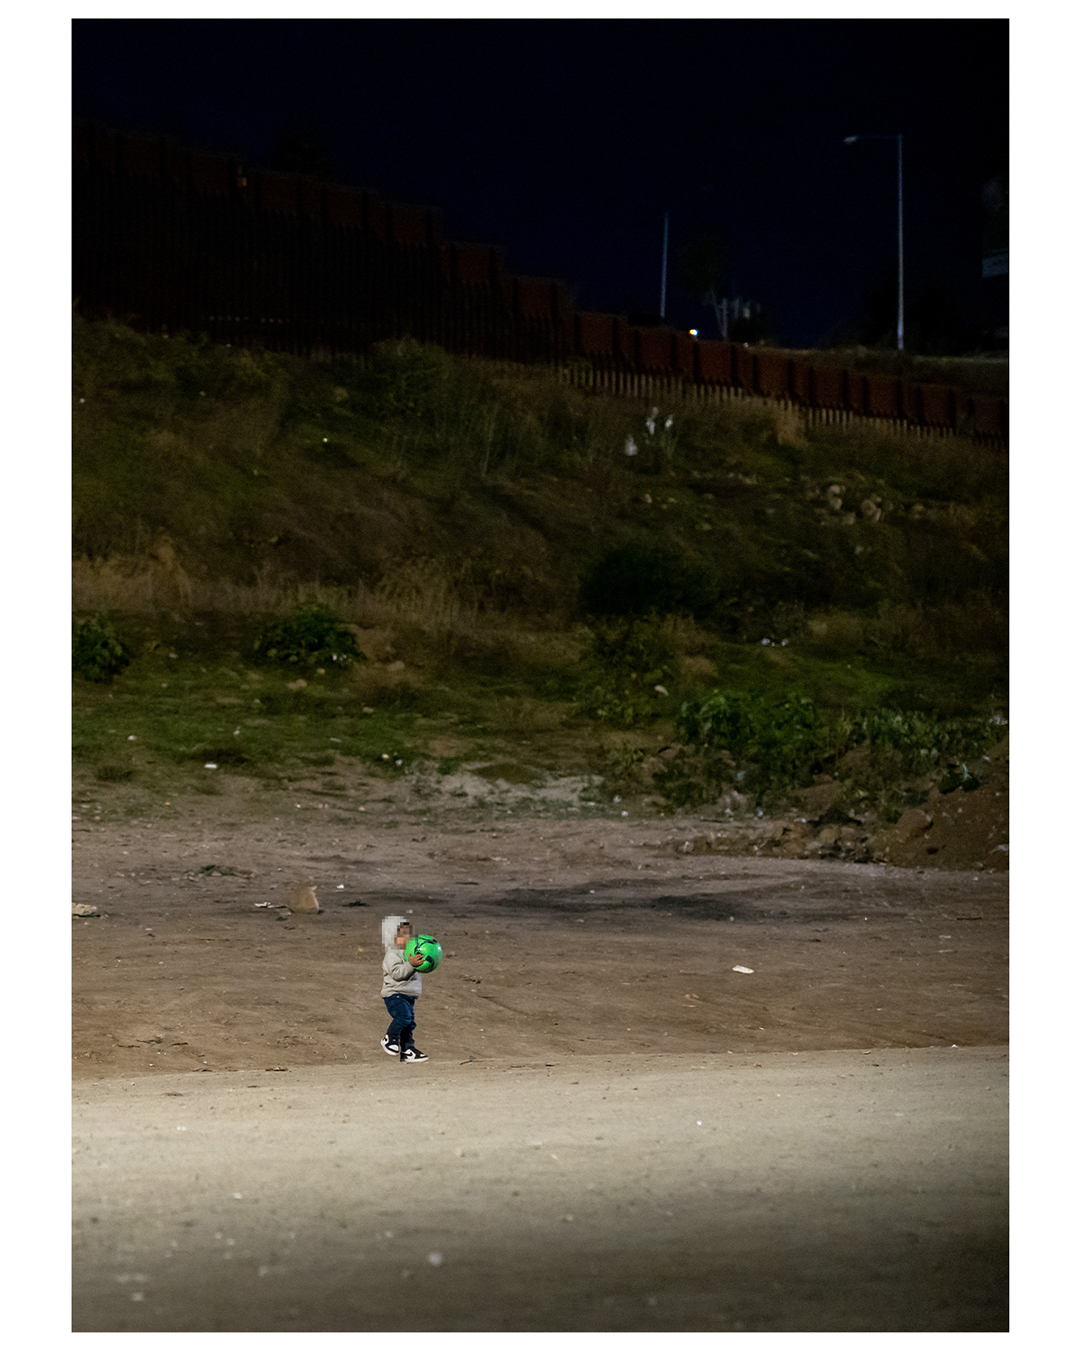 A small boy holds a bright green soccer ball up to his chest, obscuring his face, as he stands in a dirt field at night. Scrub hills and a wall can be made out in the darkness behind him.